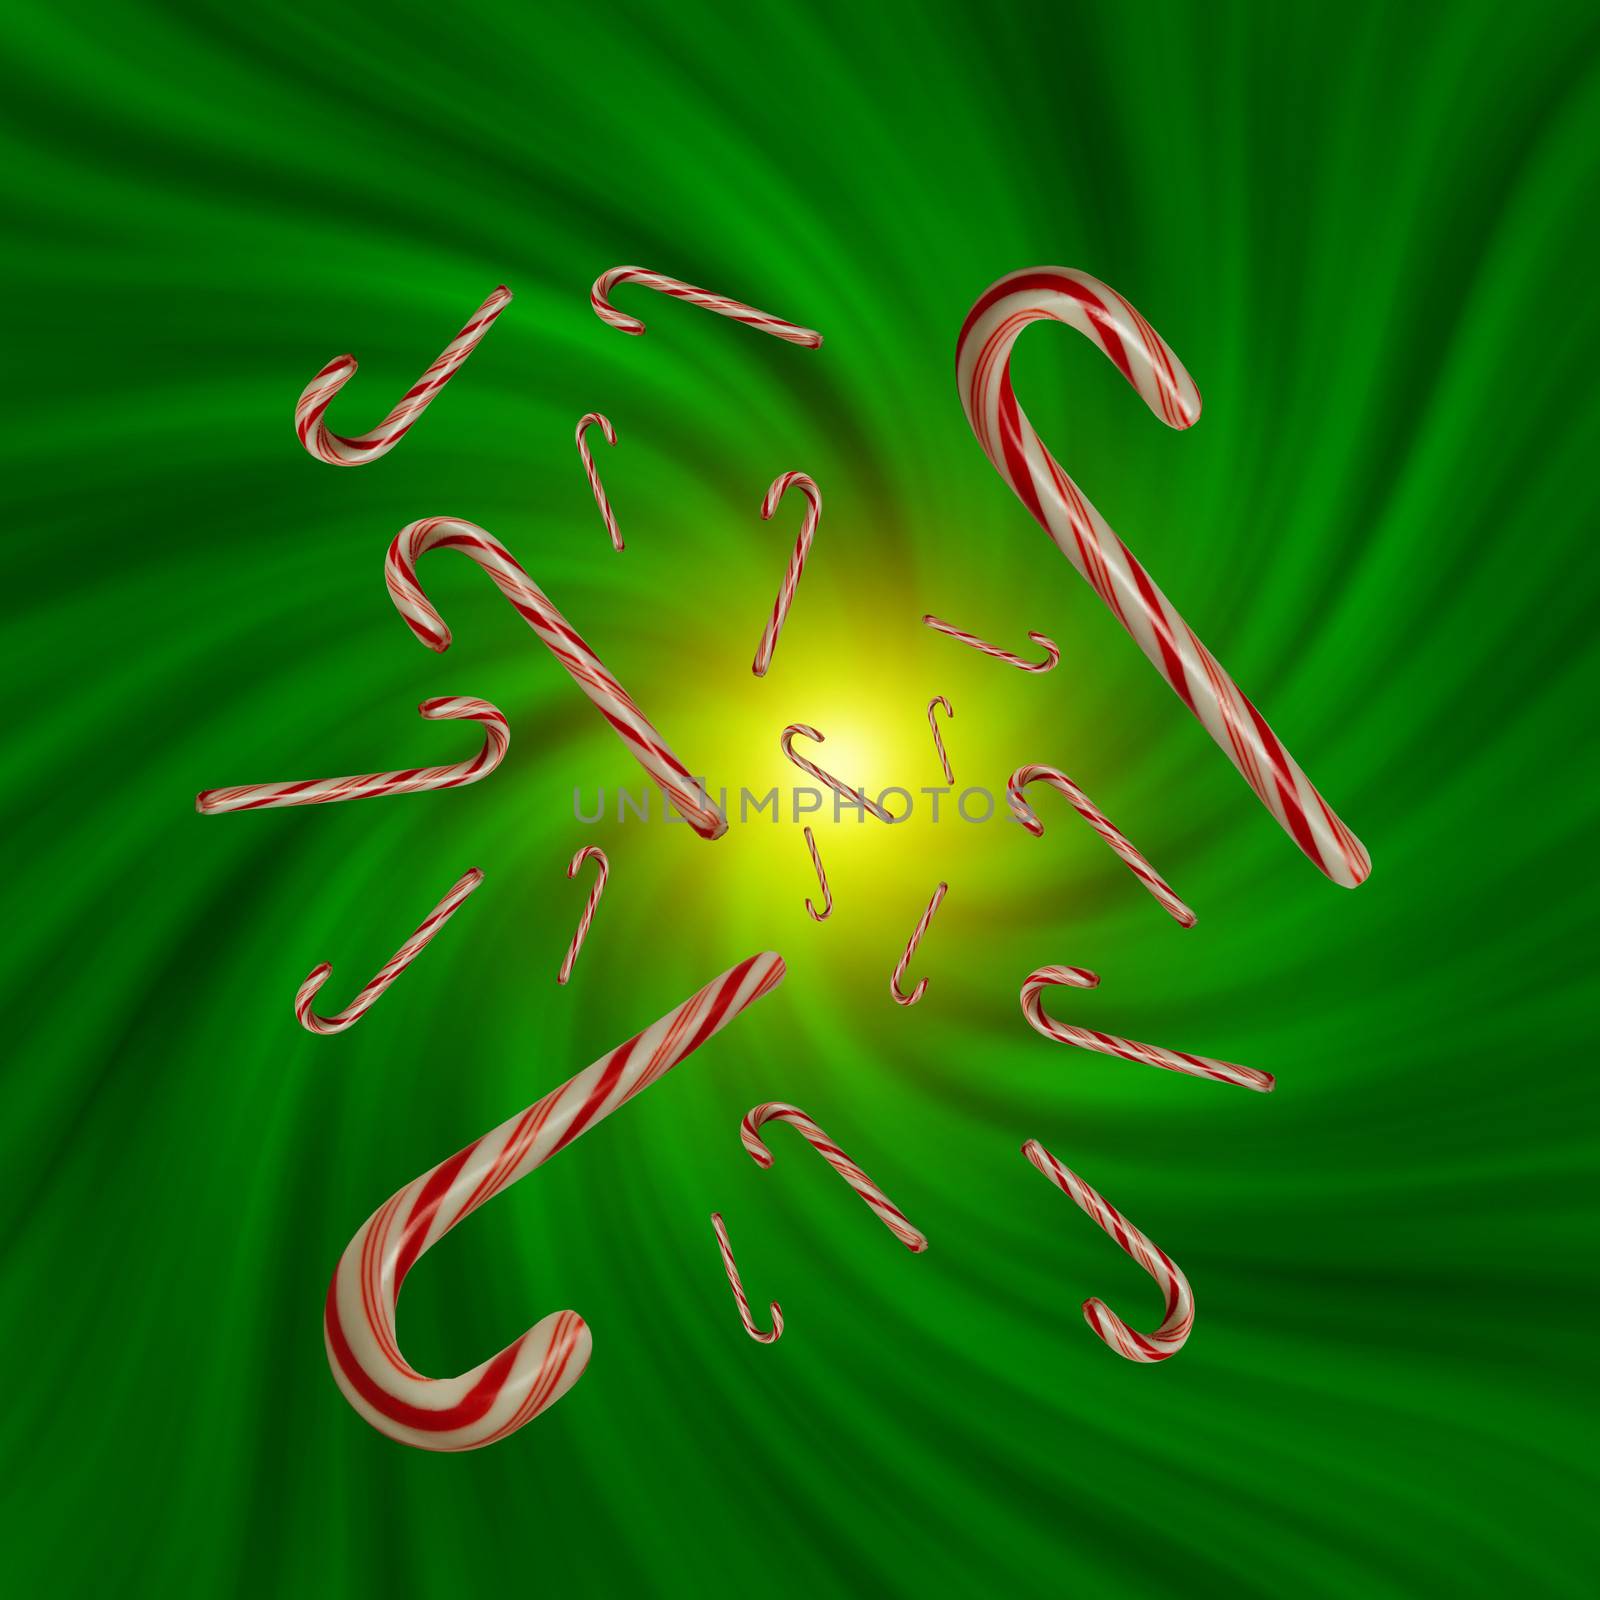 Candy canes floating in a green vortex